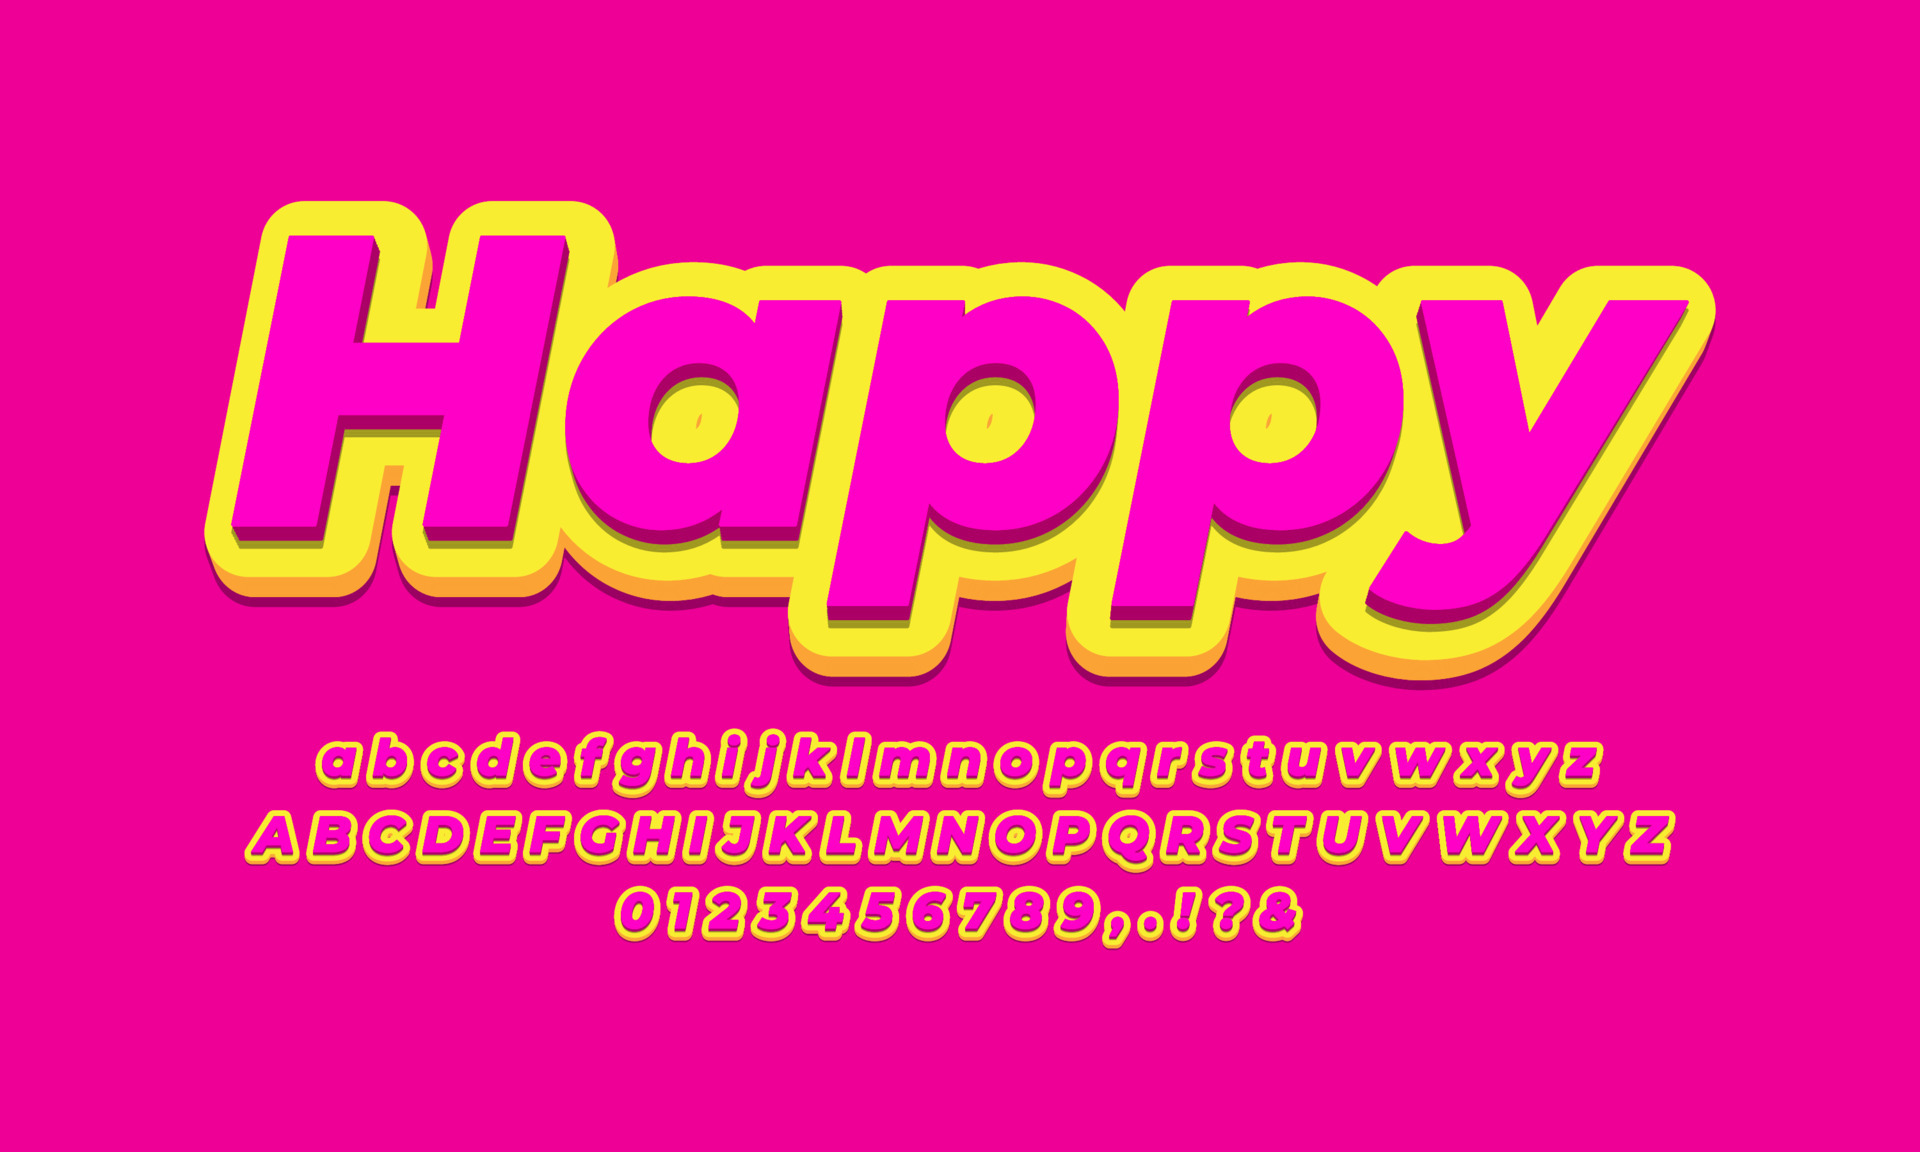 script pink and yellow 3d text effect or font effect 5249743 Vector Art ...